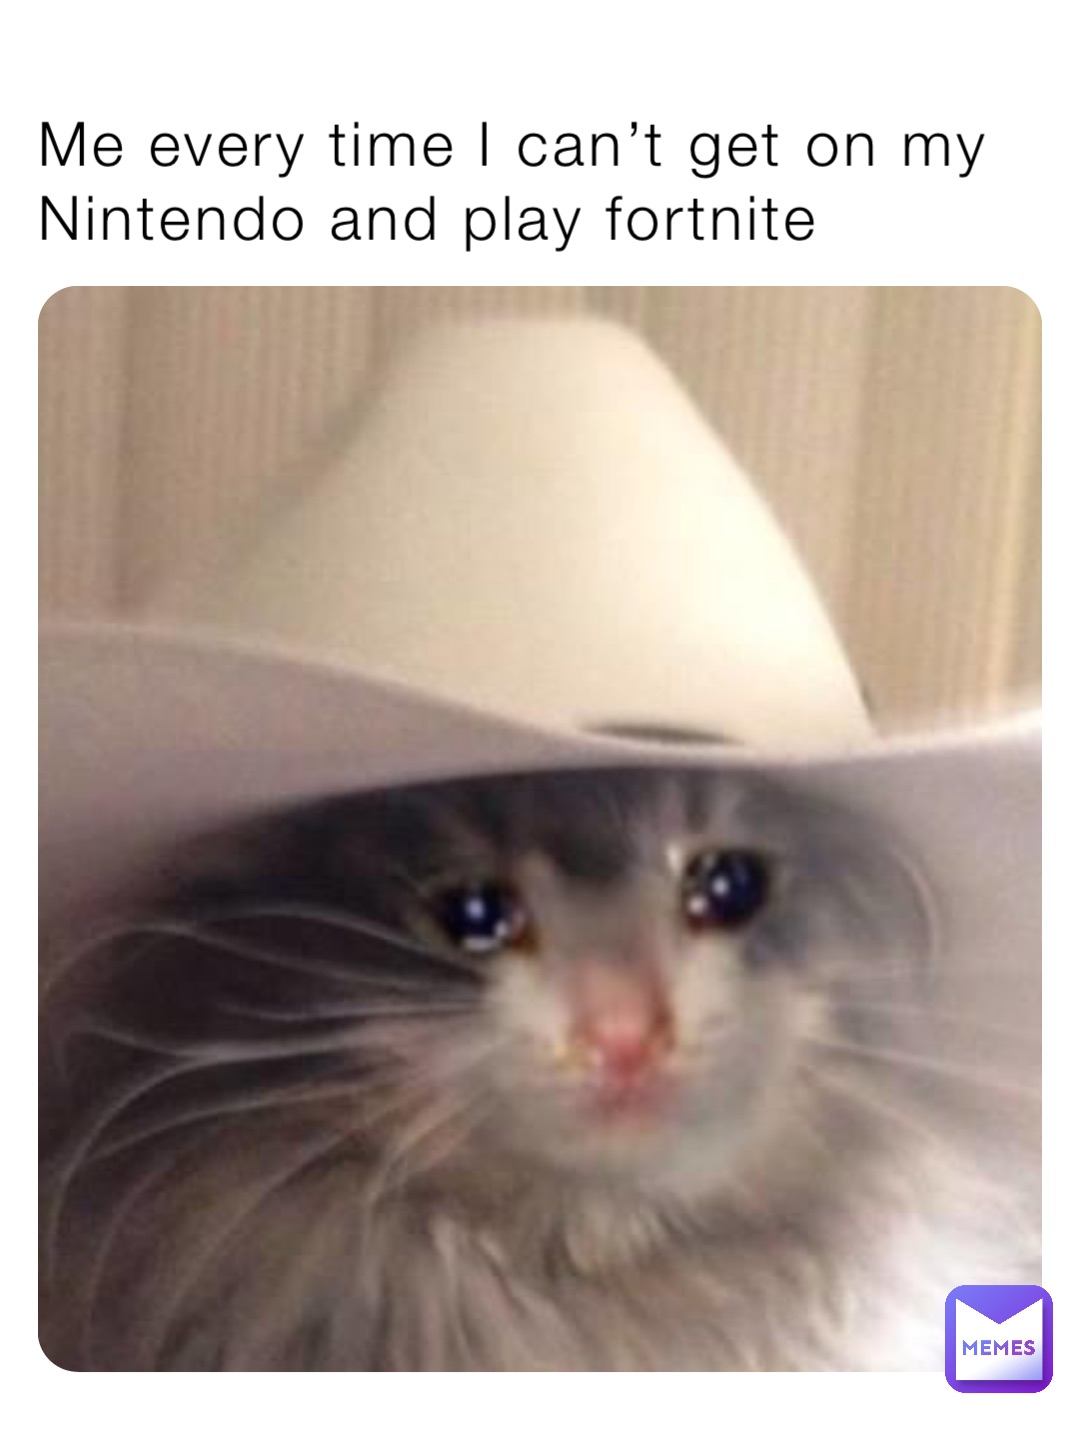 Me every time I can’t get on my Nintendo and play fortnite